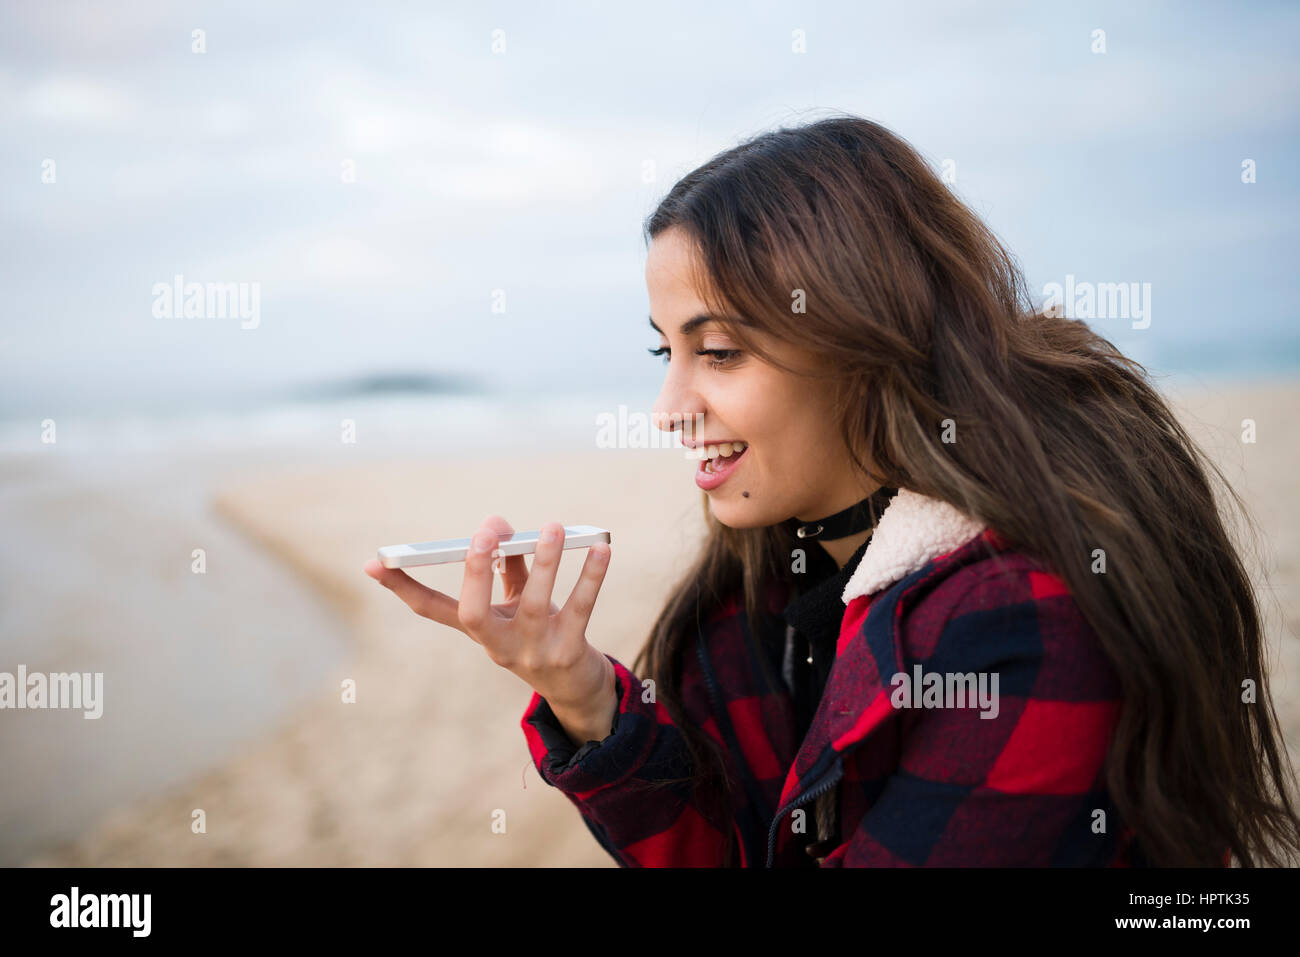 Portrait of young woman using smartphone on the beach Stock Photo